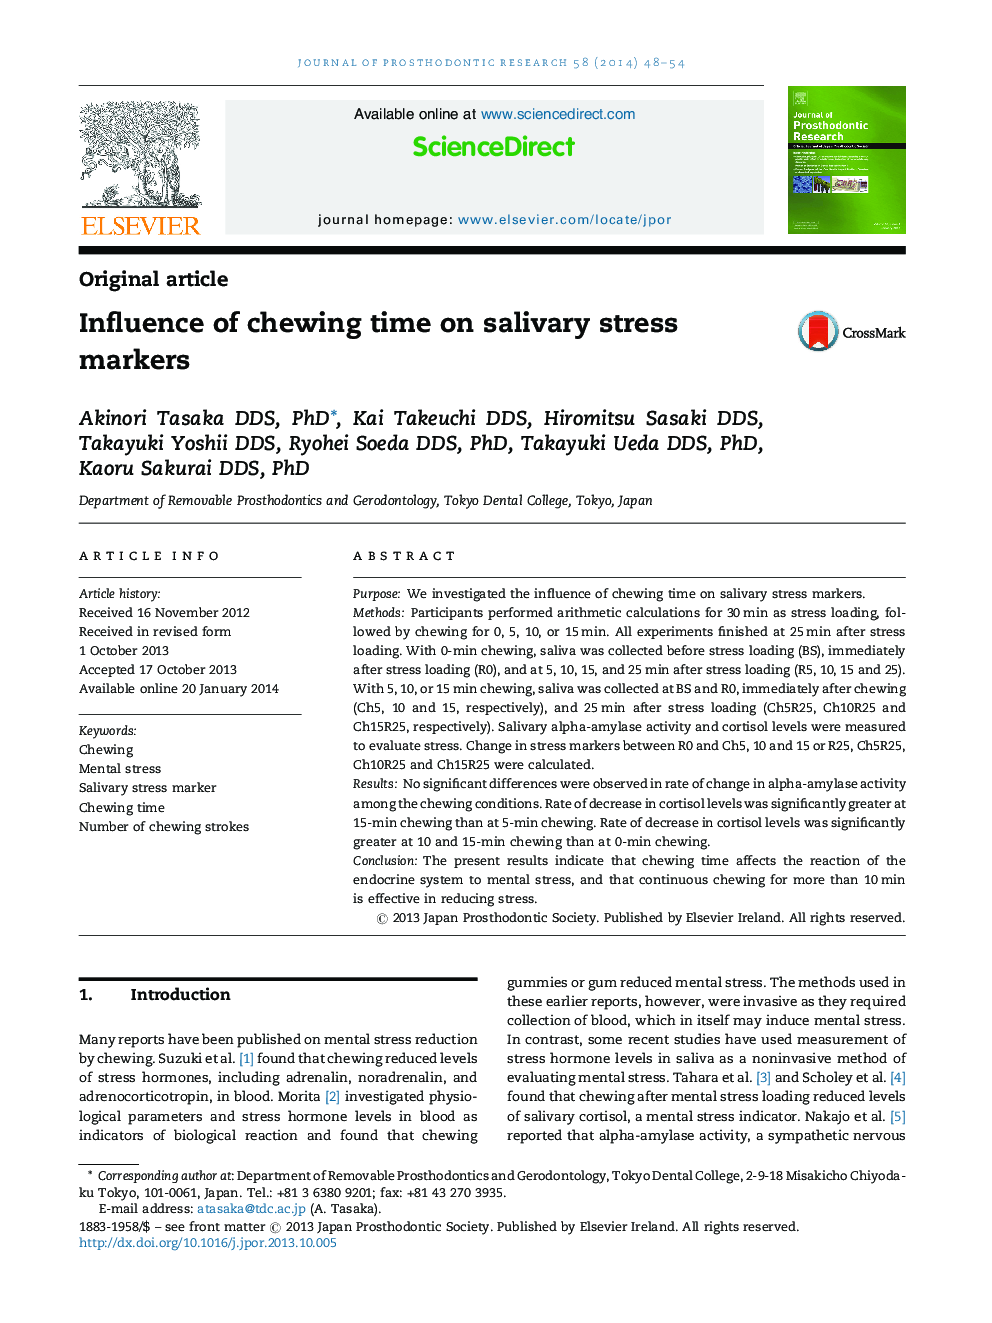 Influence of chewing time on salivary stress markers